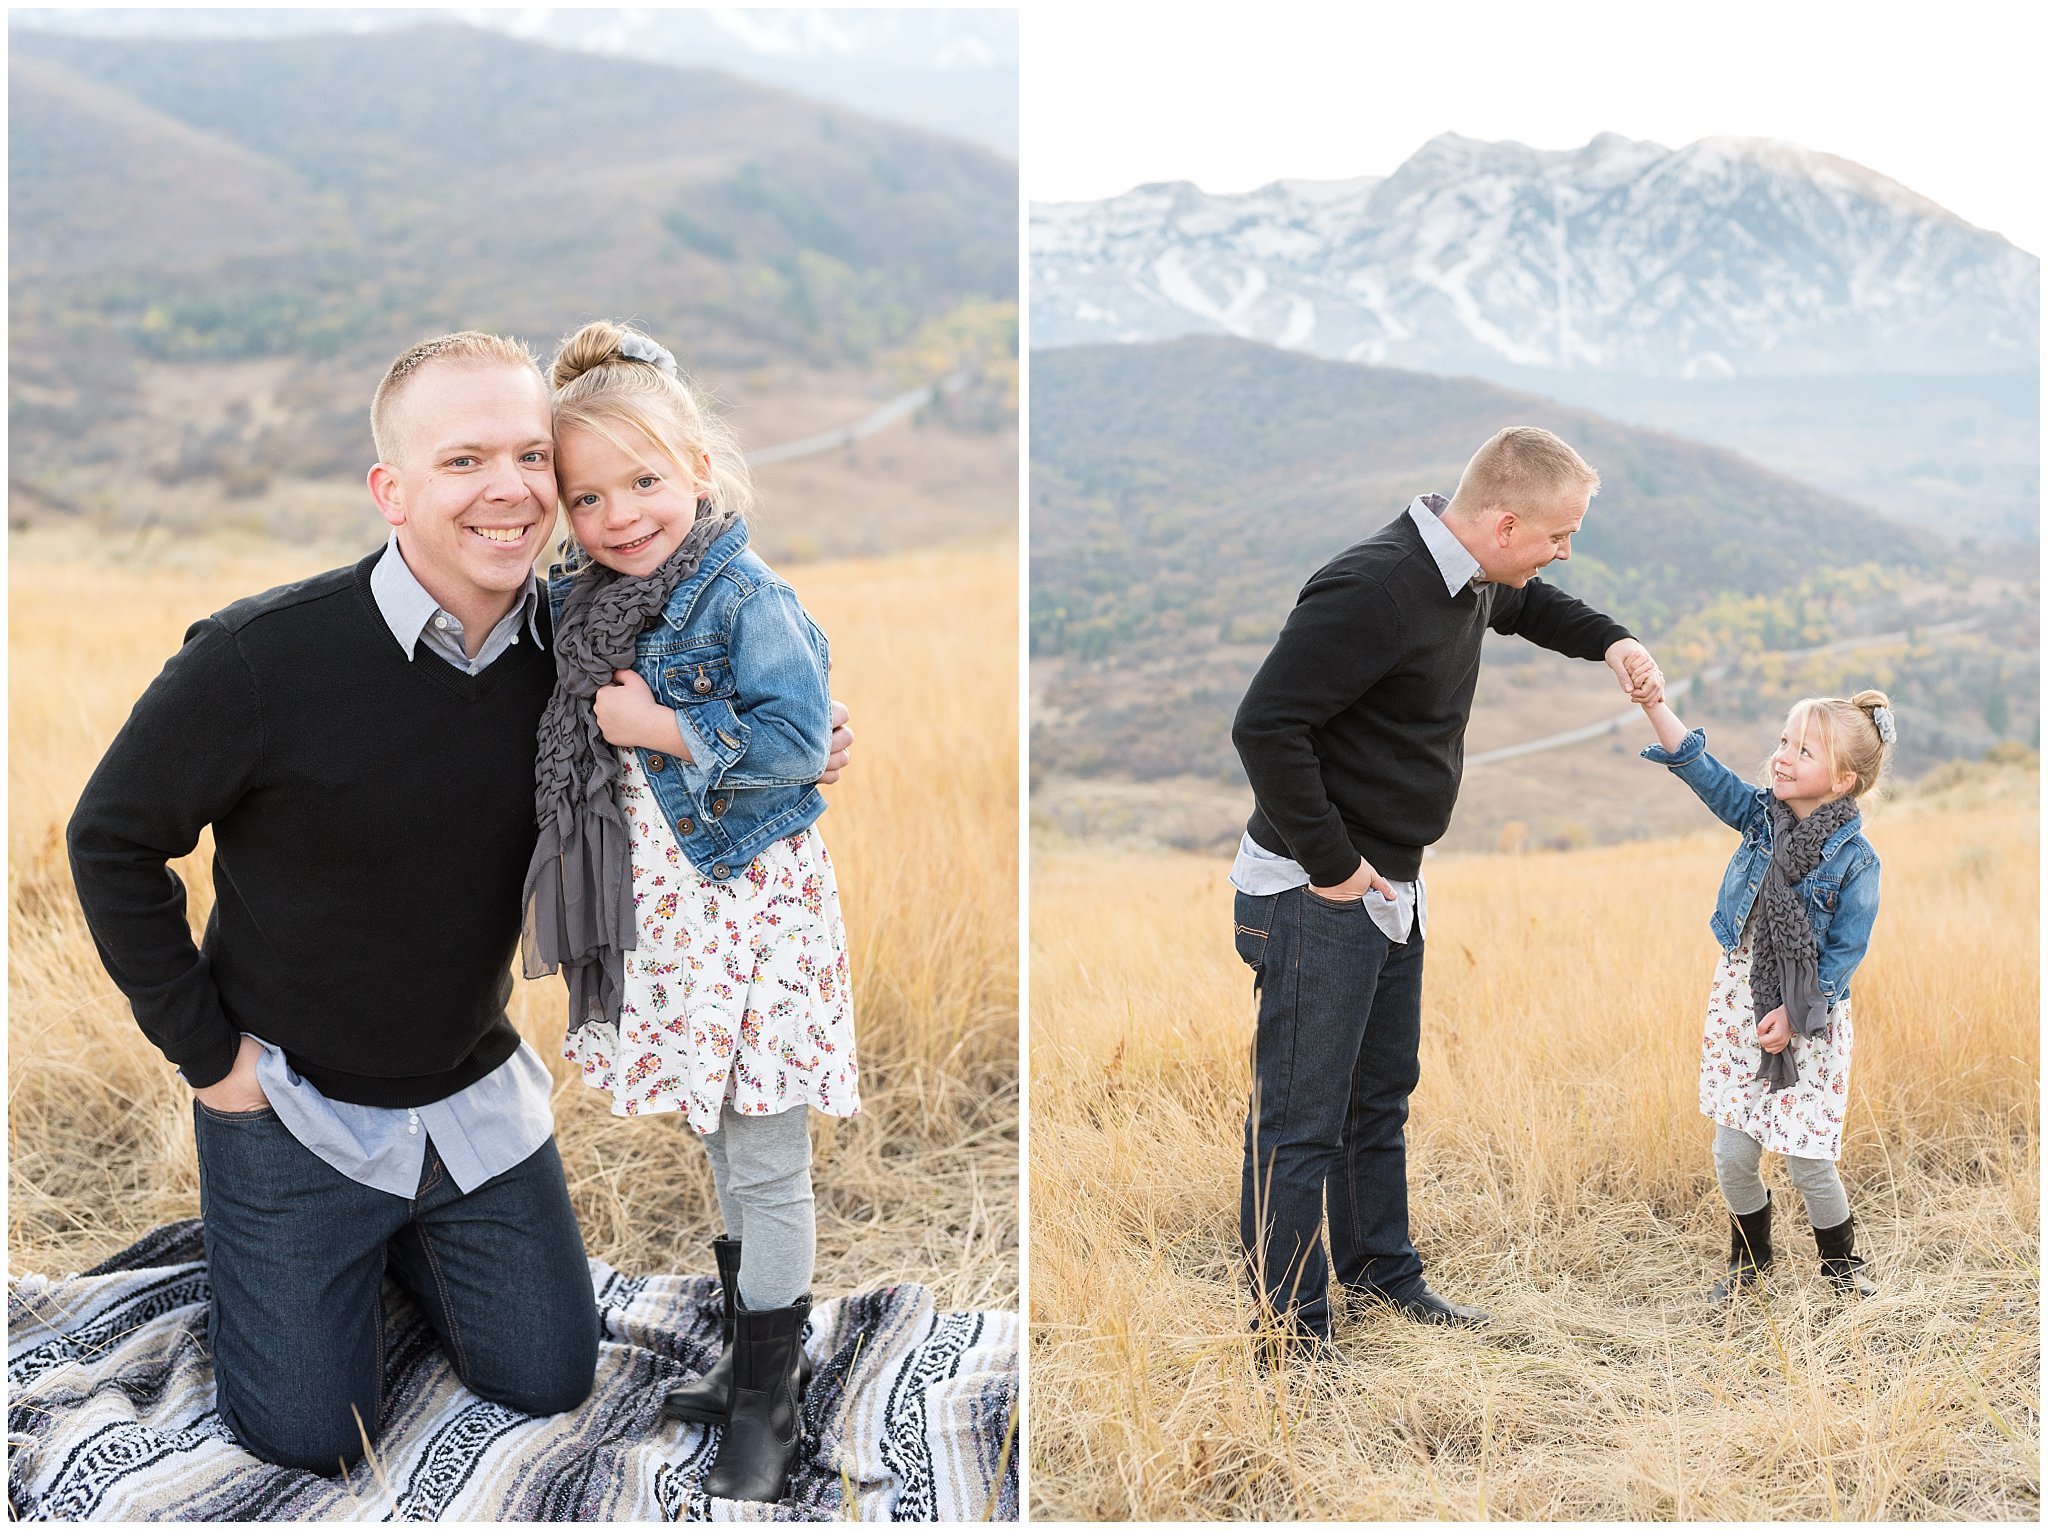 Dad smiling and dancing with daughter | Fall Family Pictures in the Mountains | Snowbasin, Utah | Jessie and Dallin Photography